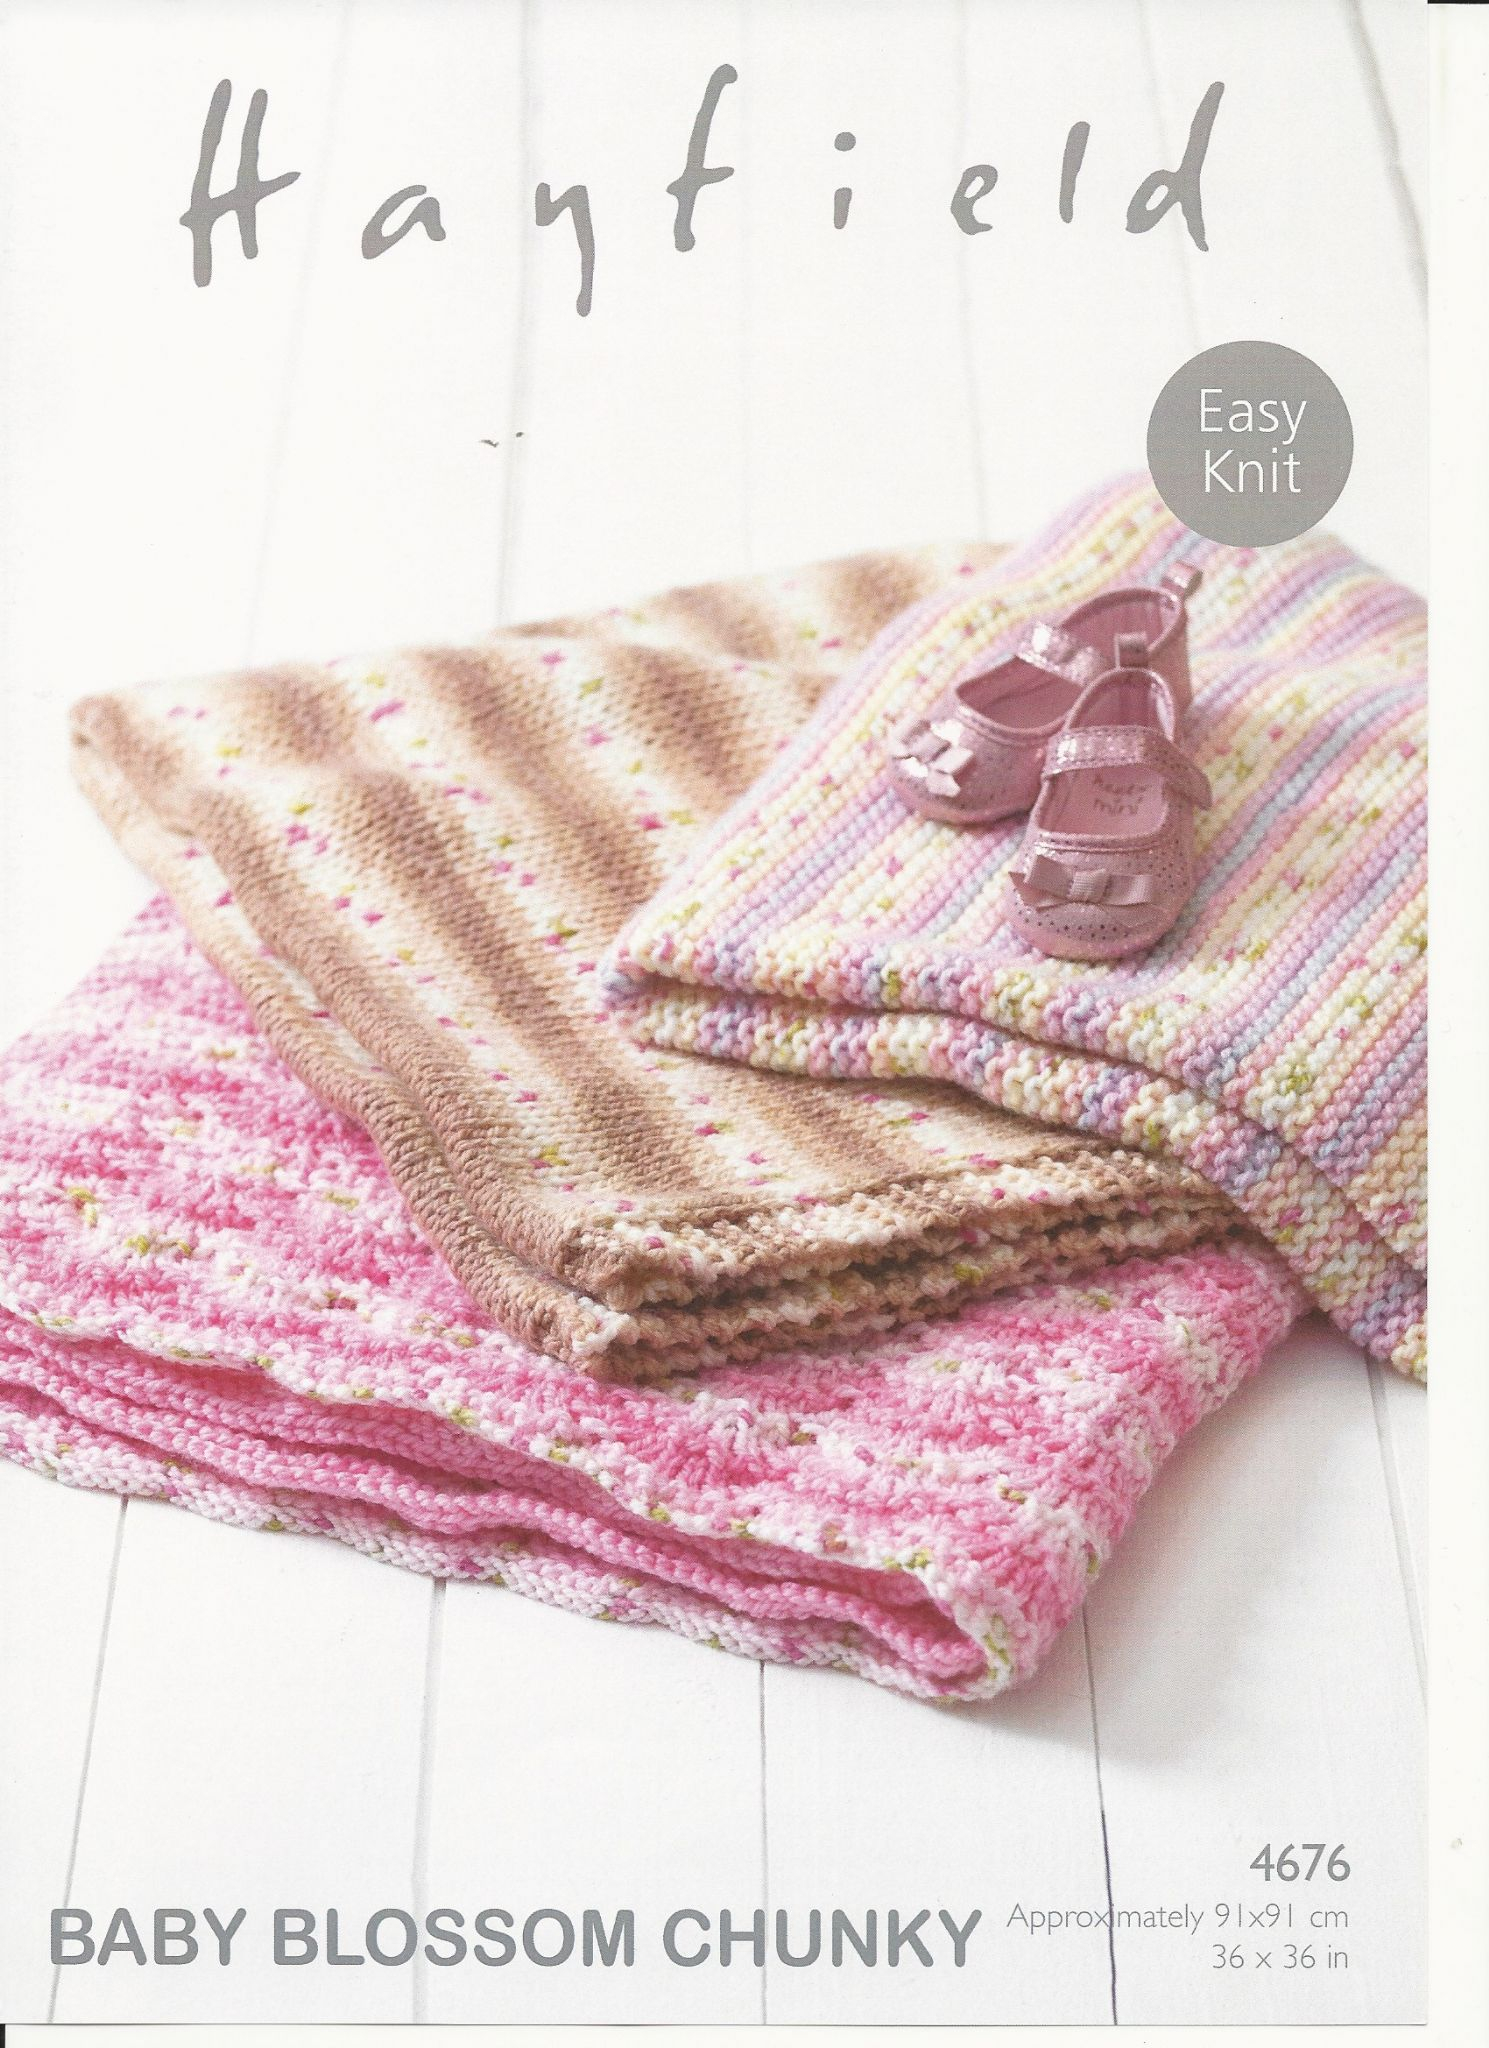 Knitting Pattern For Baby Blankets Hayfield Babies Blankets Knitting Pattern In Ba Blossom Chunky 4676